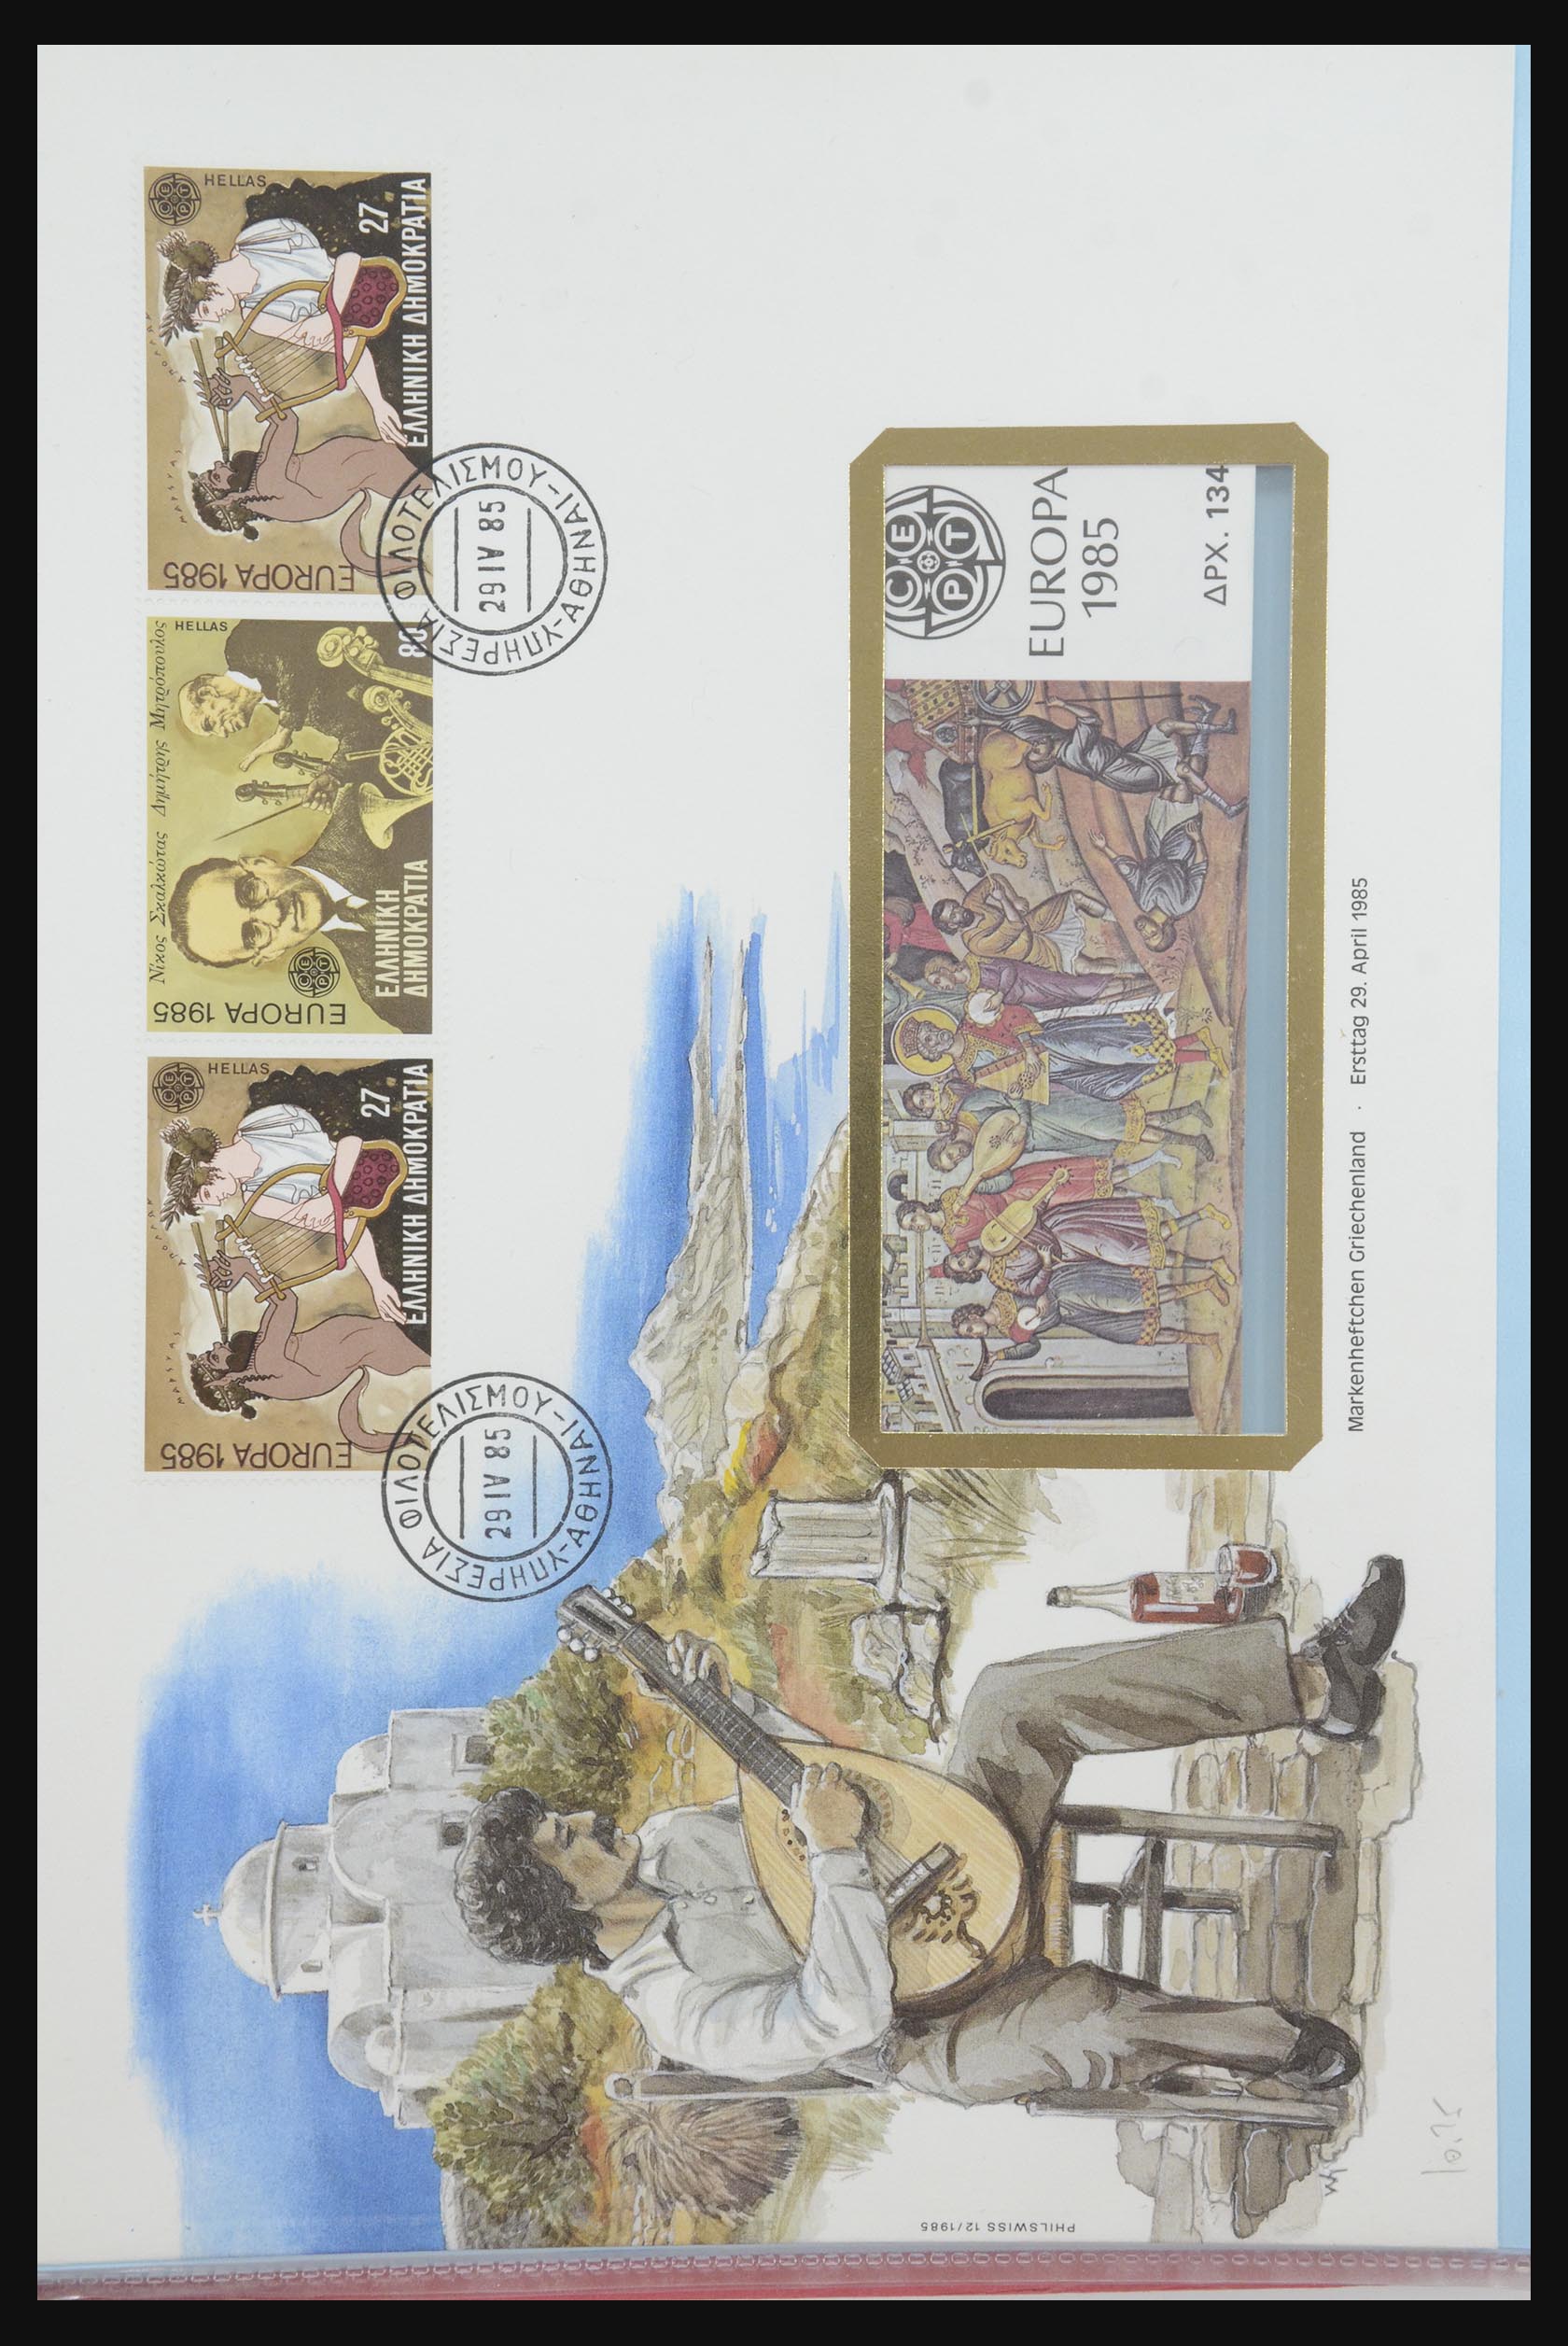 31915 413 - 31915 Western Europe souvenir sheets and stamp booklets on FDC.